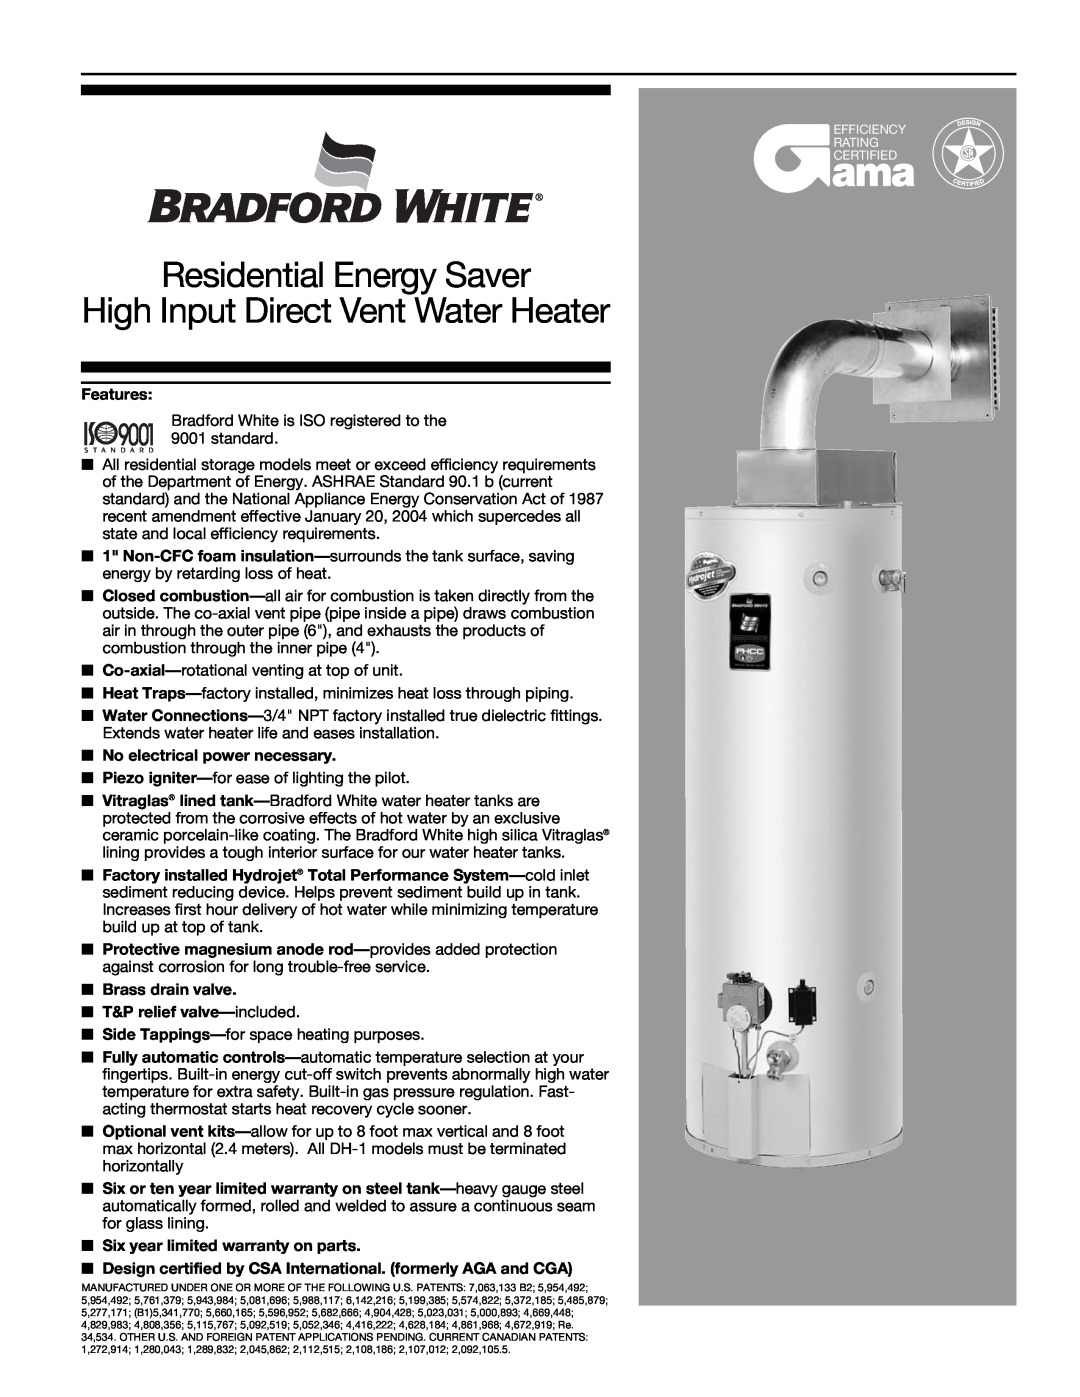 Bradford-White Corp 105-B warranty Residential Energy Saver High Input Direct Vent Water Heater, Features 